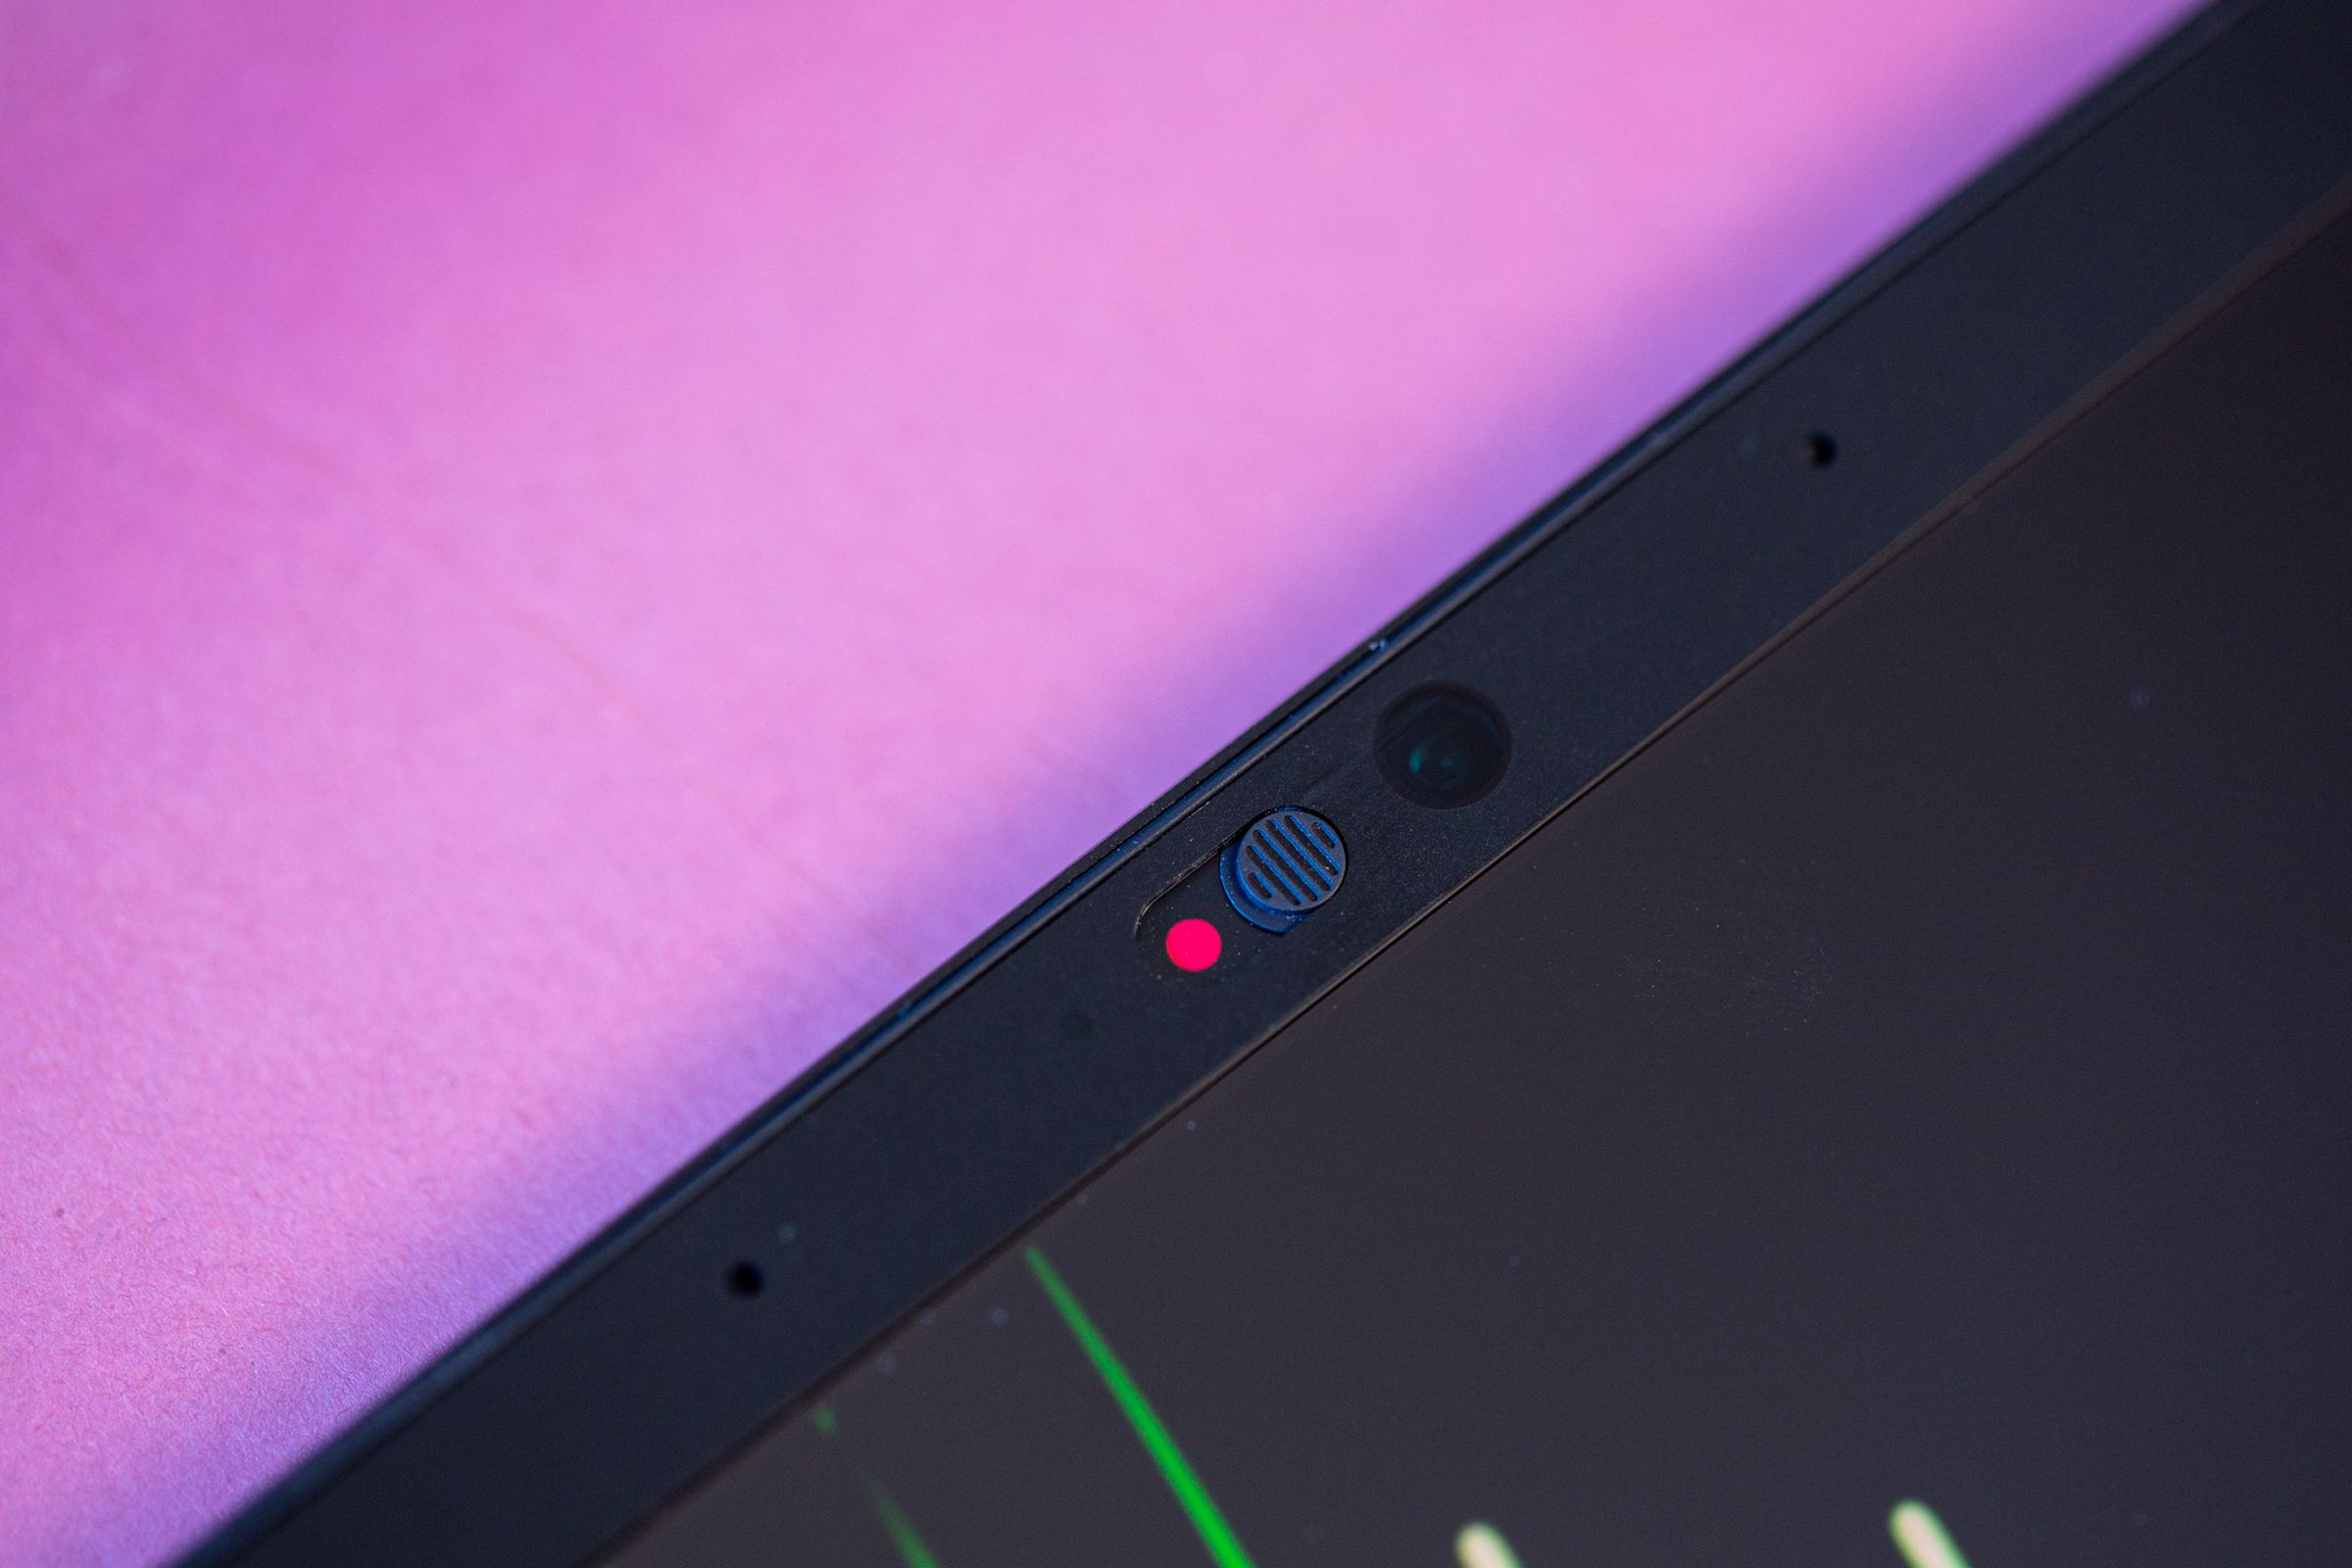 The webcam and shutter on the Razer Blade 16.